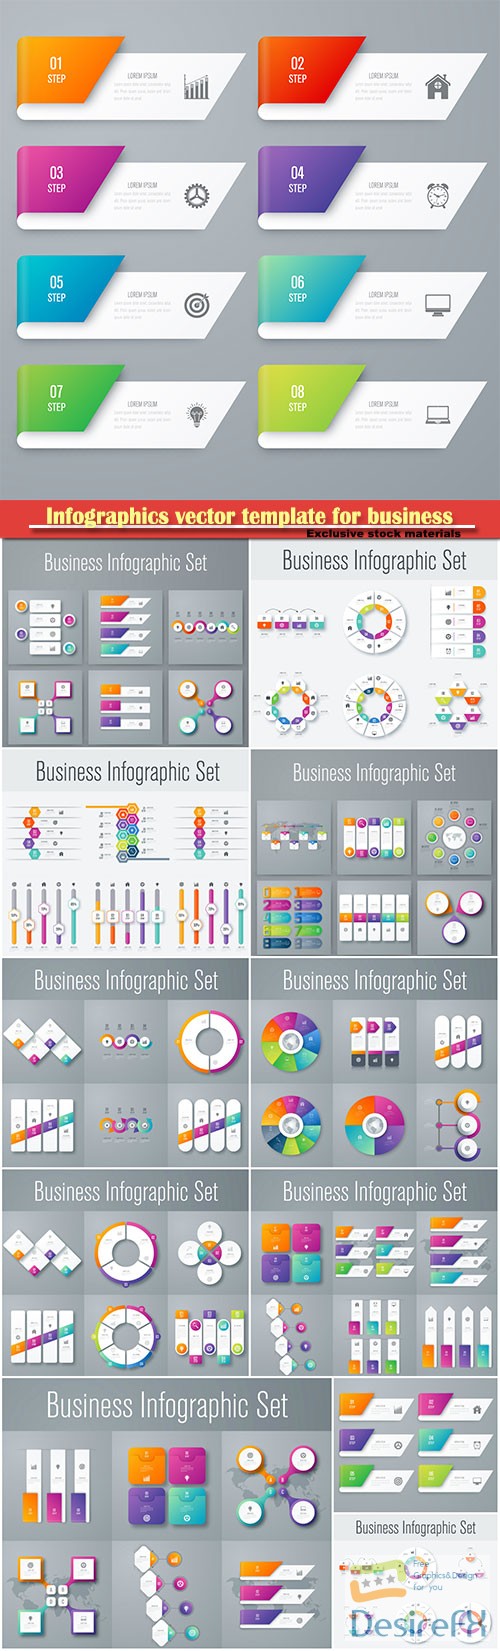 Infographics vector template for business presentations or information banner # 64